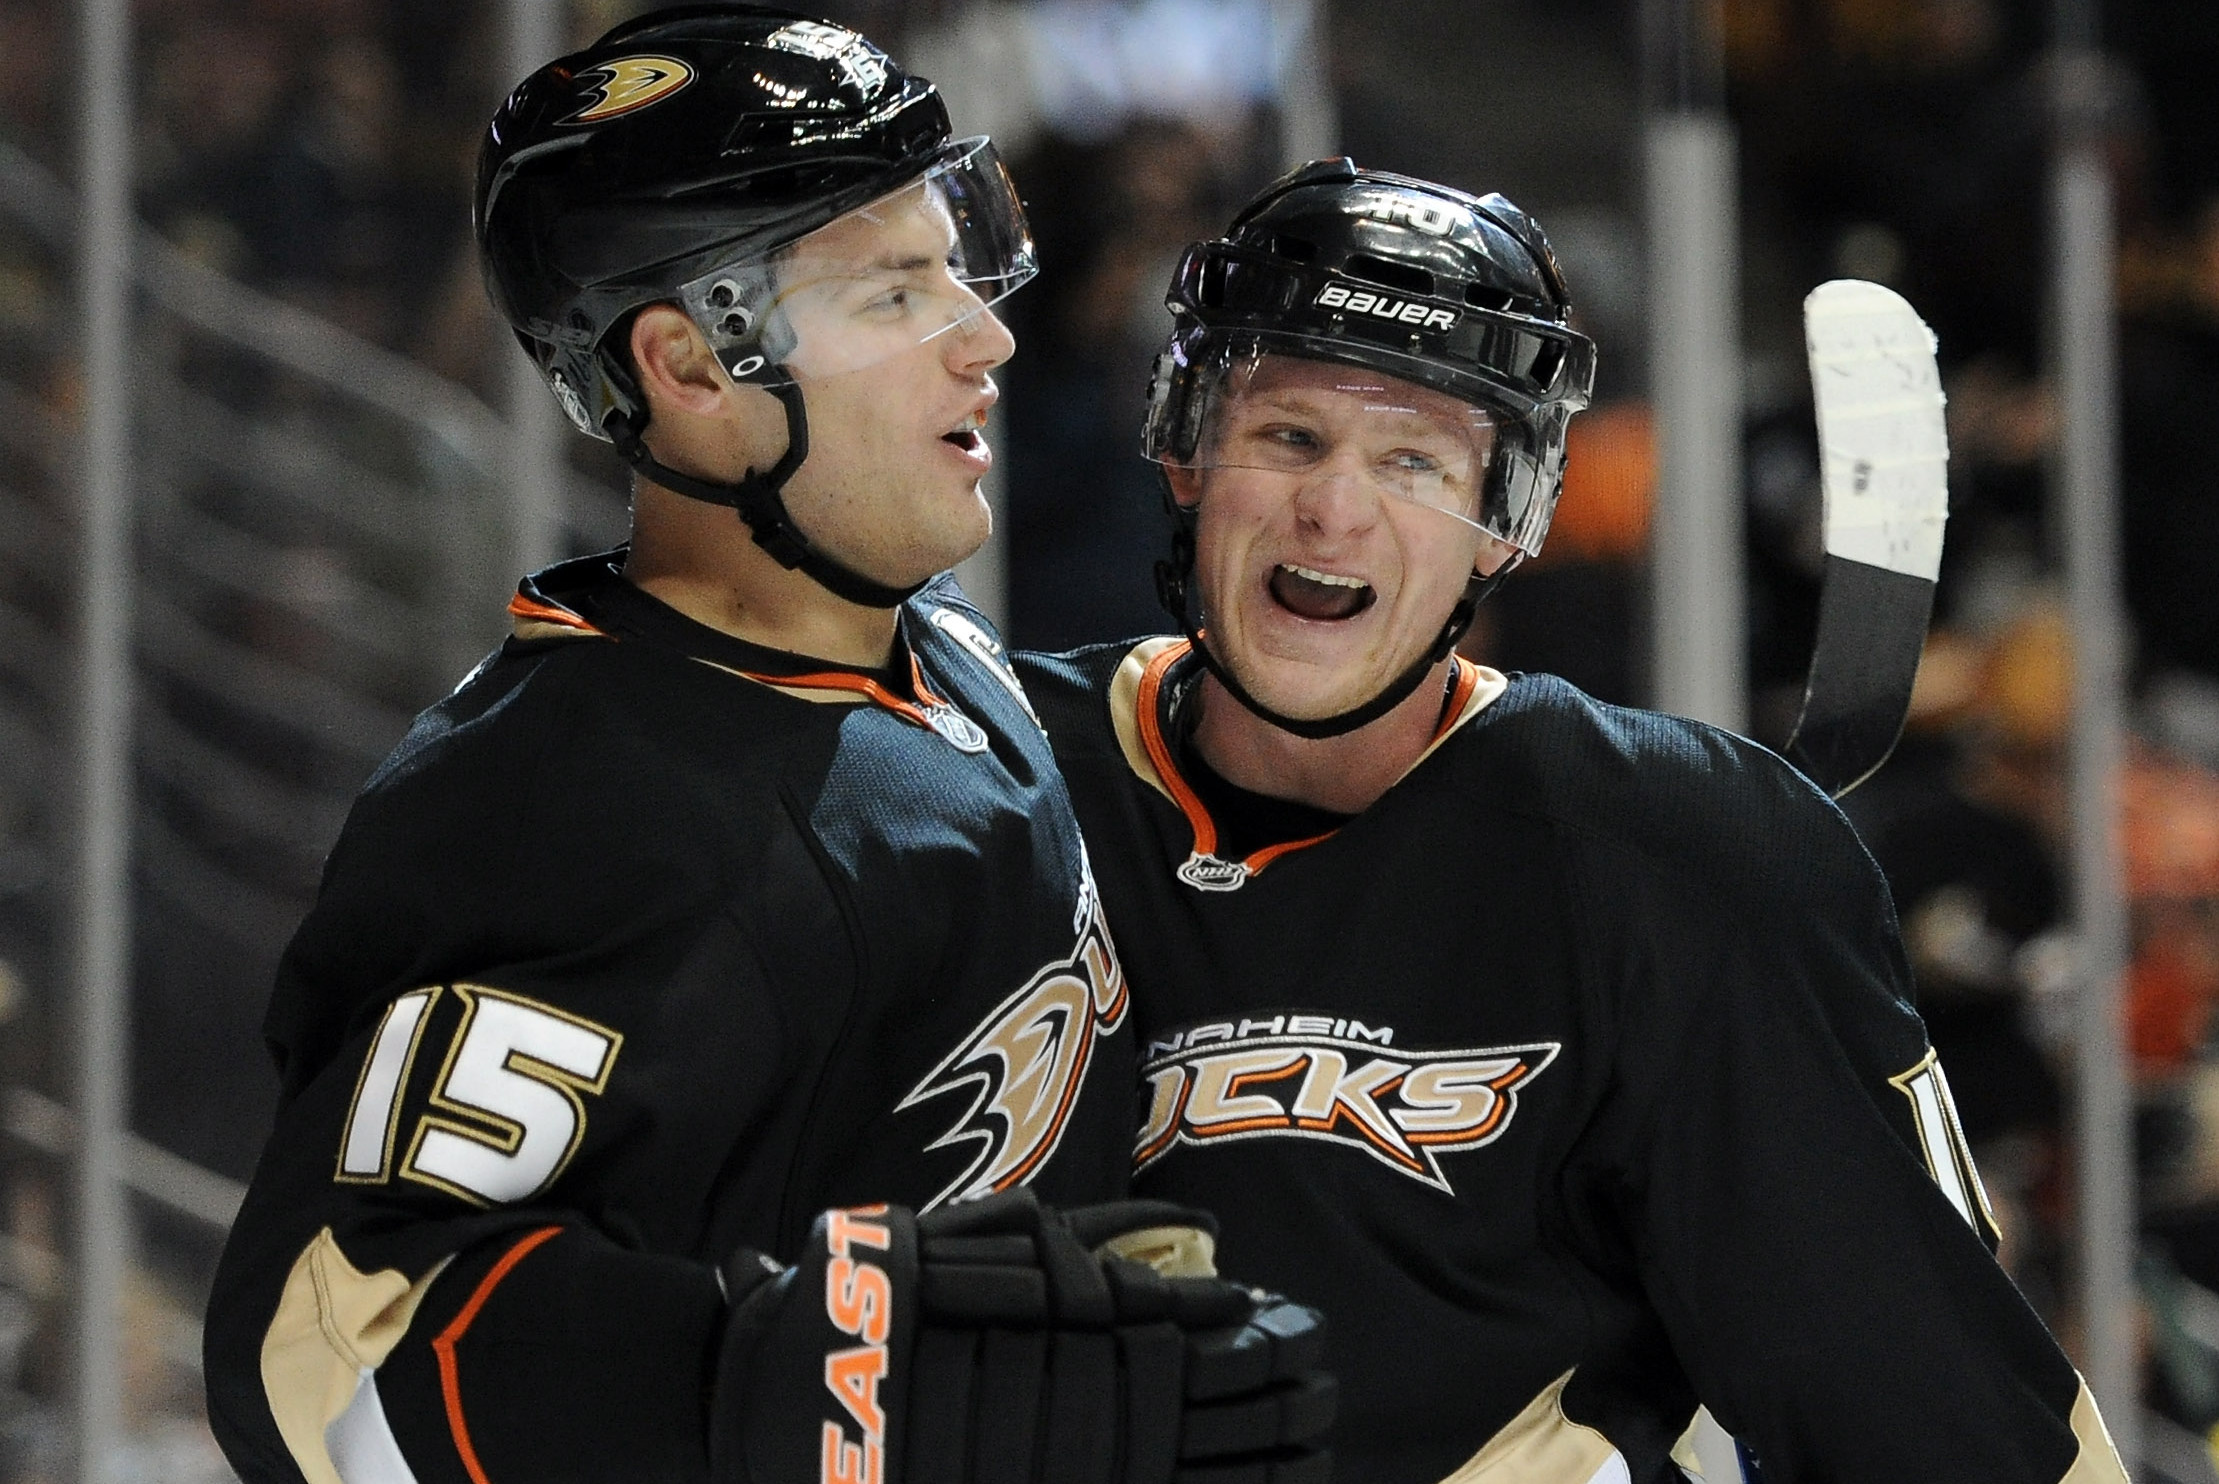 He's our jerk': In his return to Anaheim, Ducks fans explain why